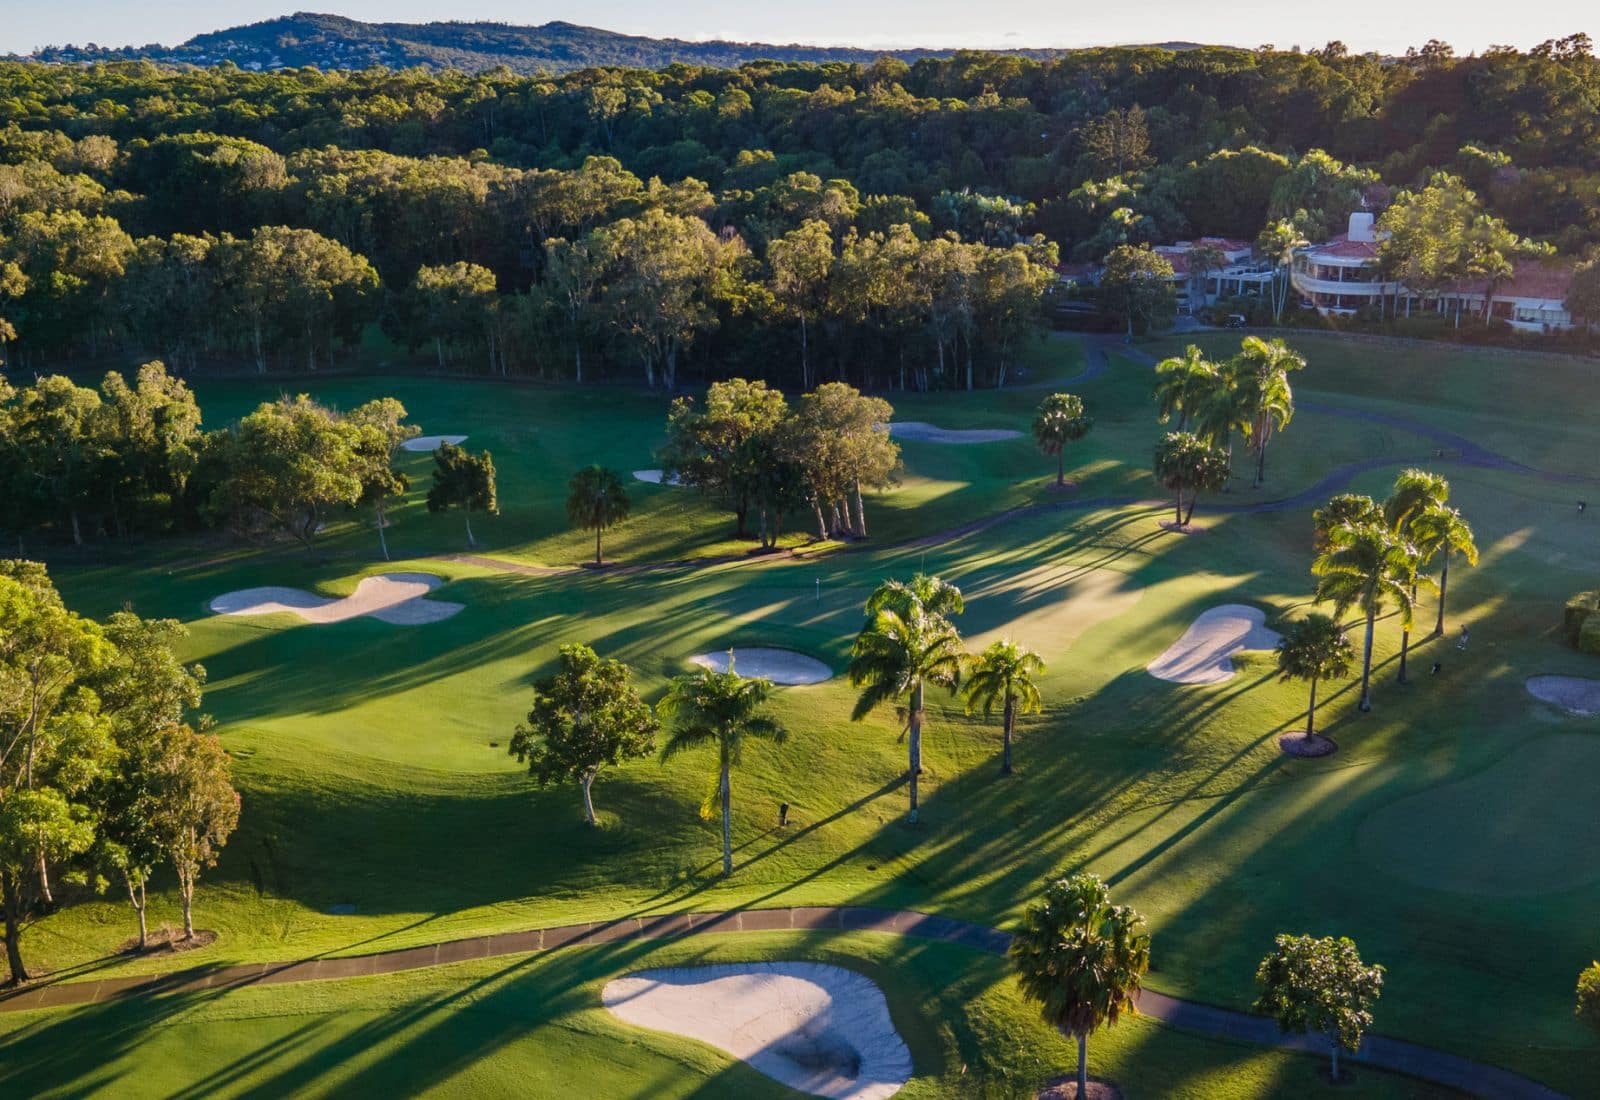 Noosa Springs Golf and Spa Resort – Book your conference or event & receive complimentary AV hire, a savings of up to $350*